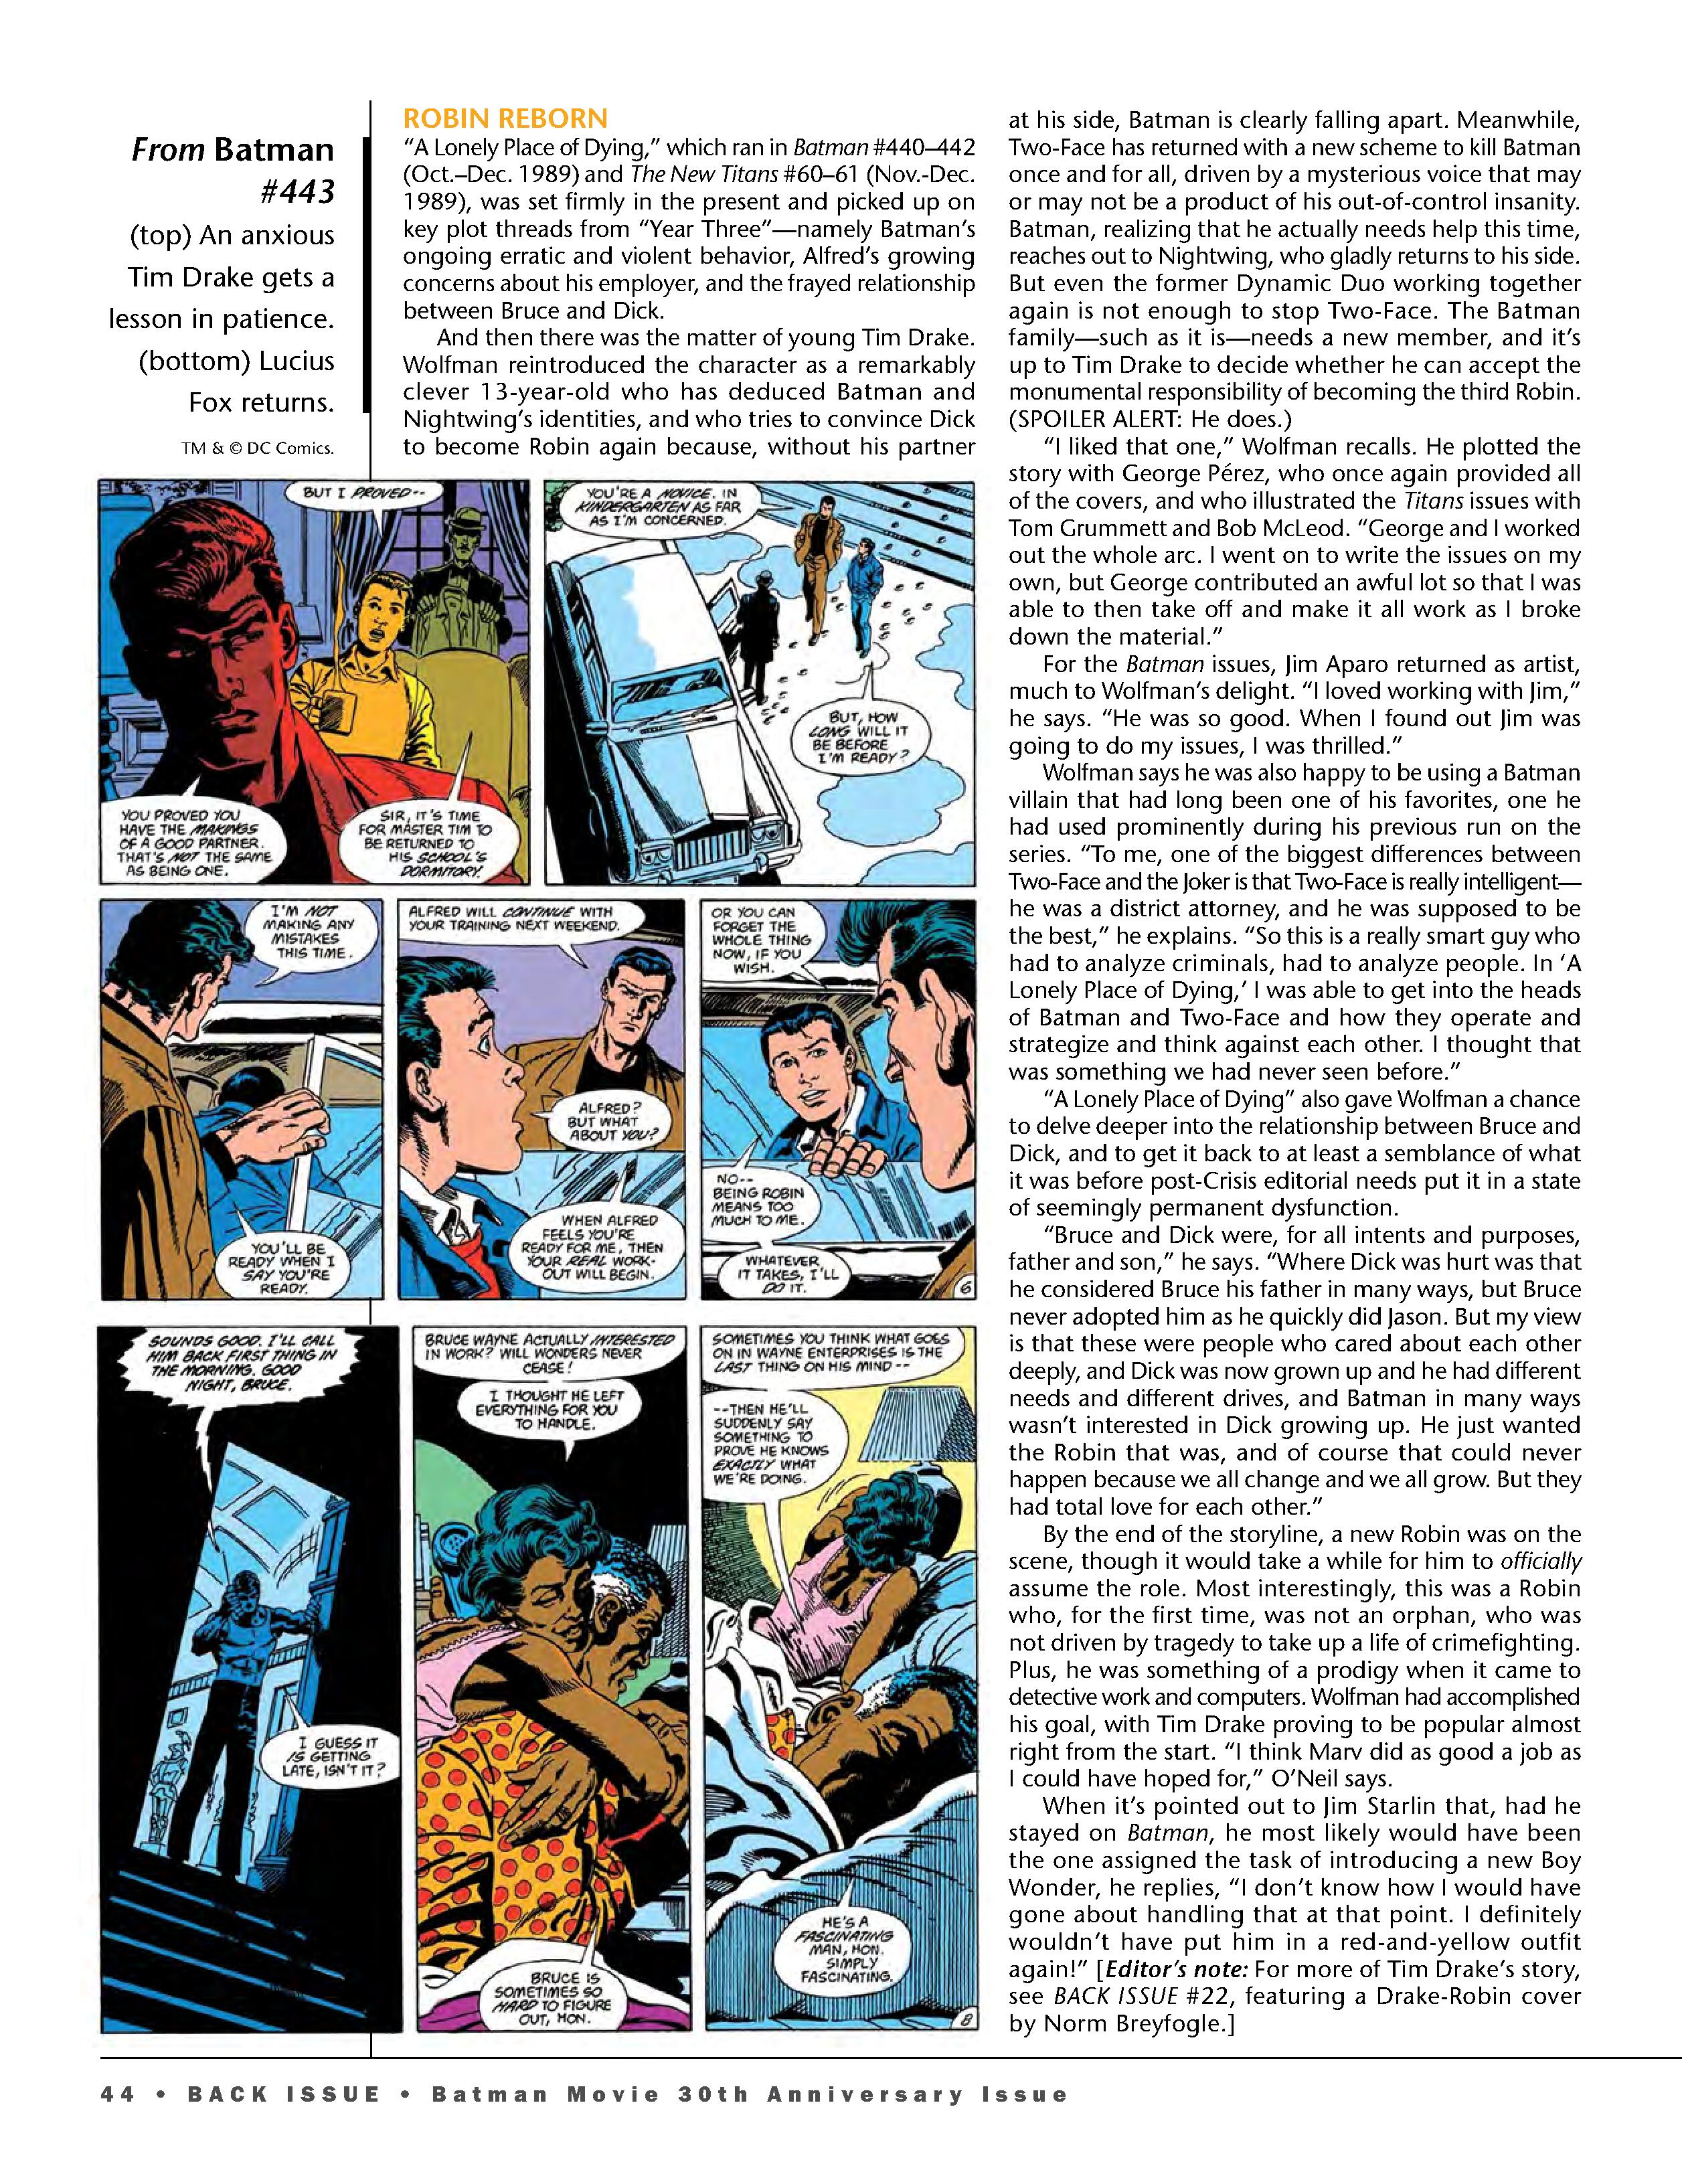 Read online Back Issue comic -  Issue #113 - 46